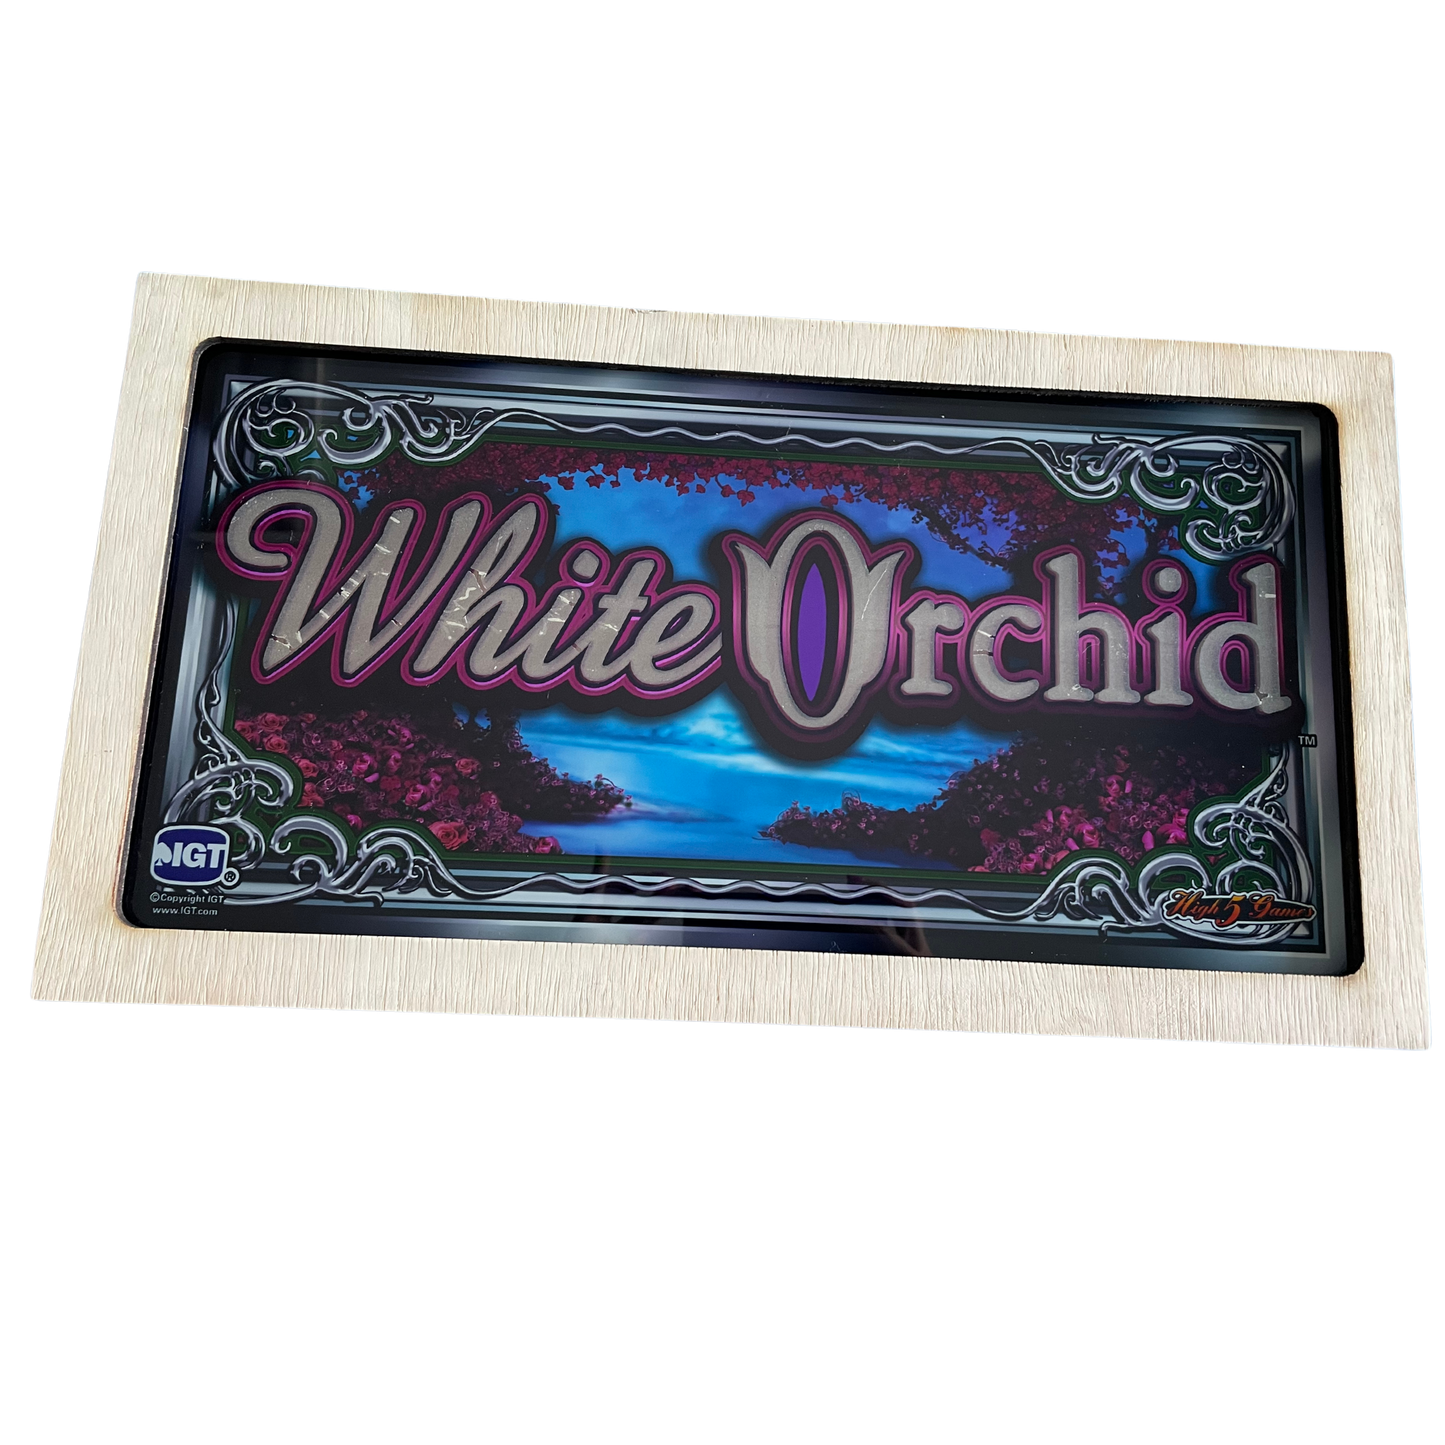 White Orchid Slot Glass